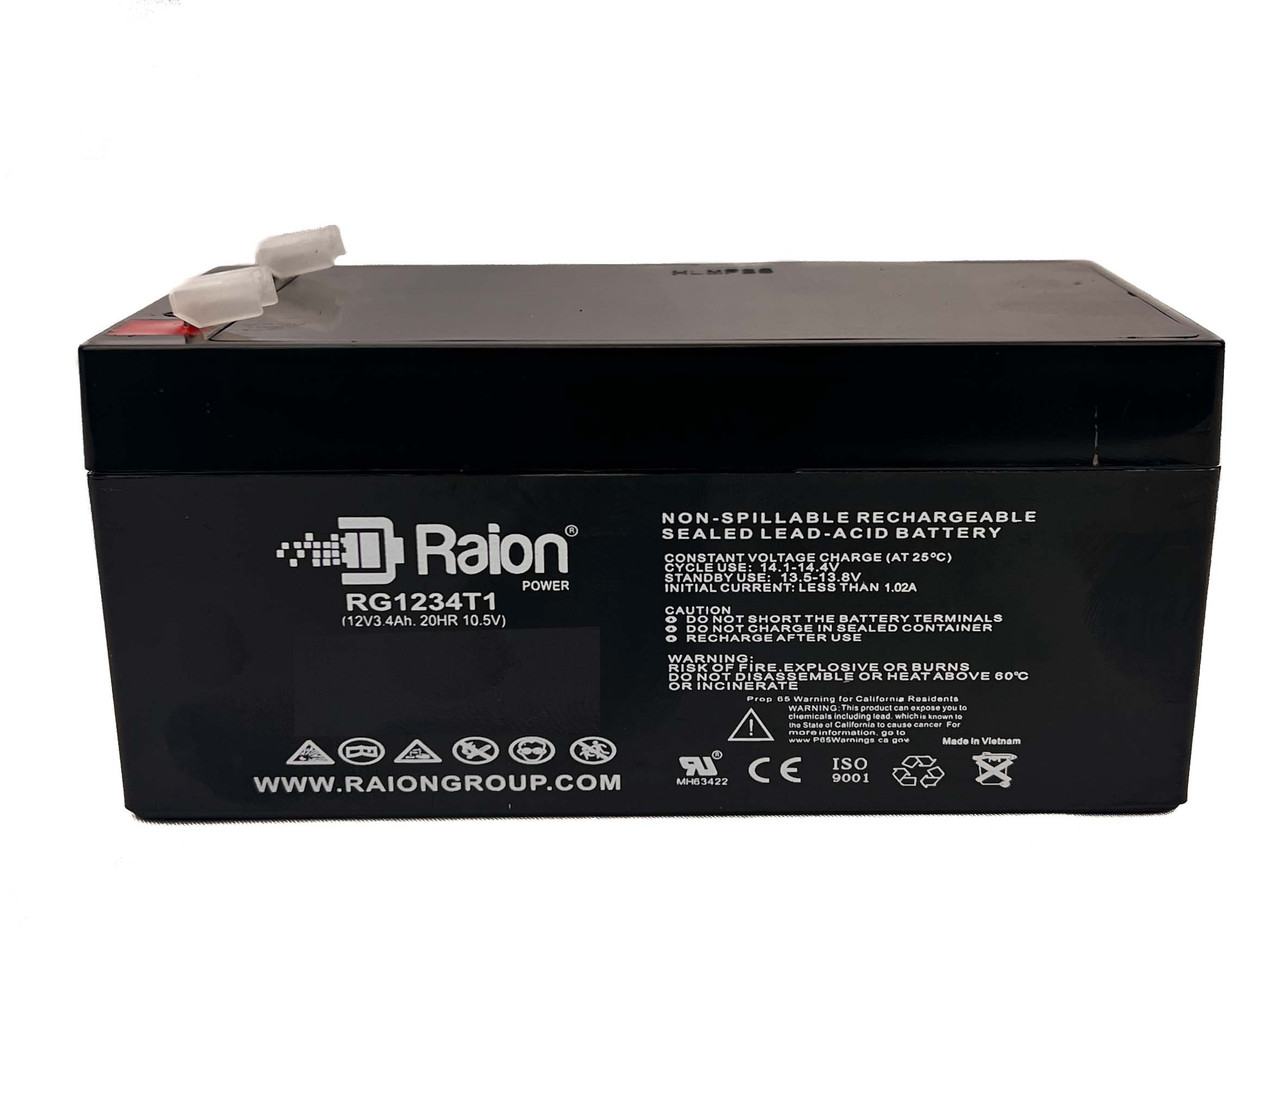 Raion Power RG1234T1 Rechargeable Compatible Replacement Battery for Criticare Systems 601, 602 IQ Poet Pulse Oximeter